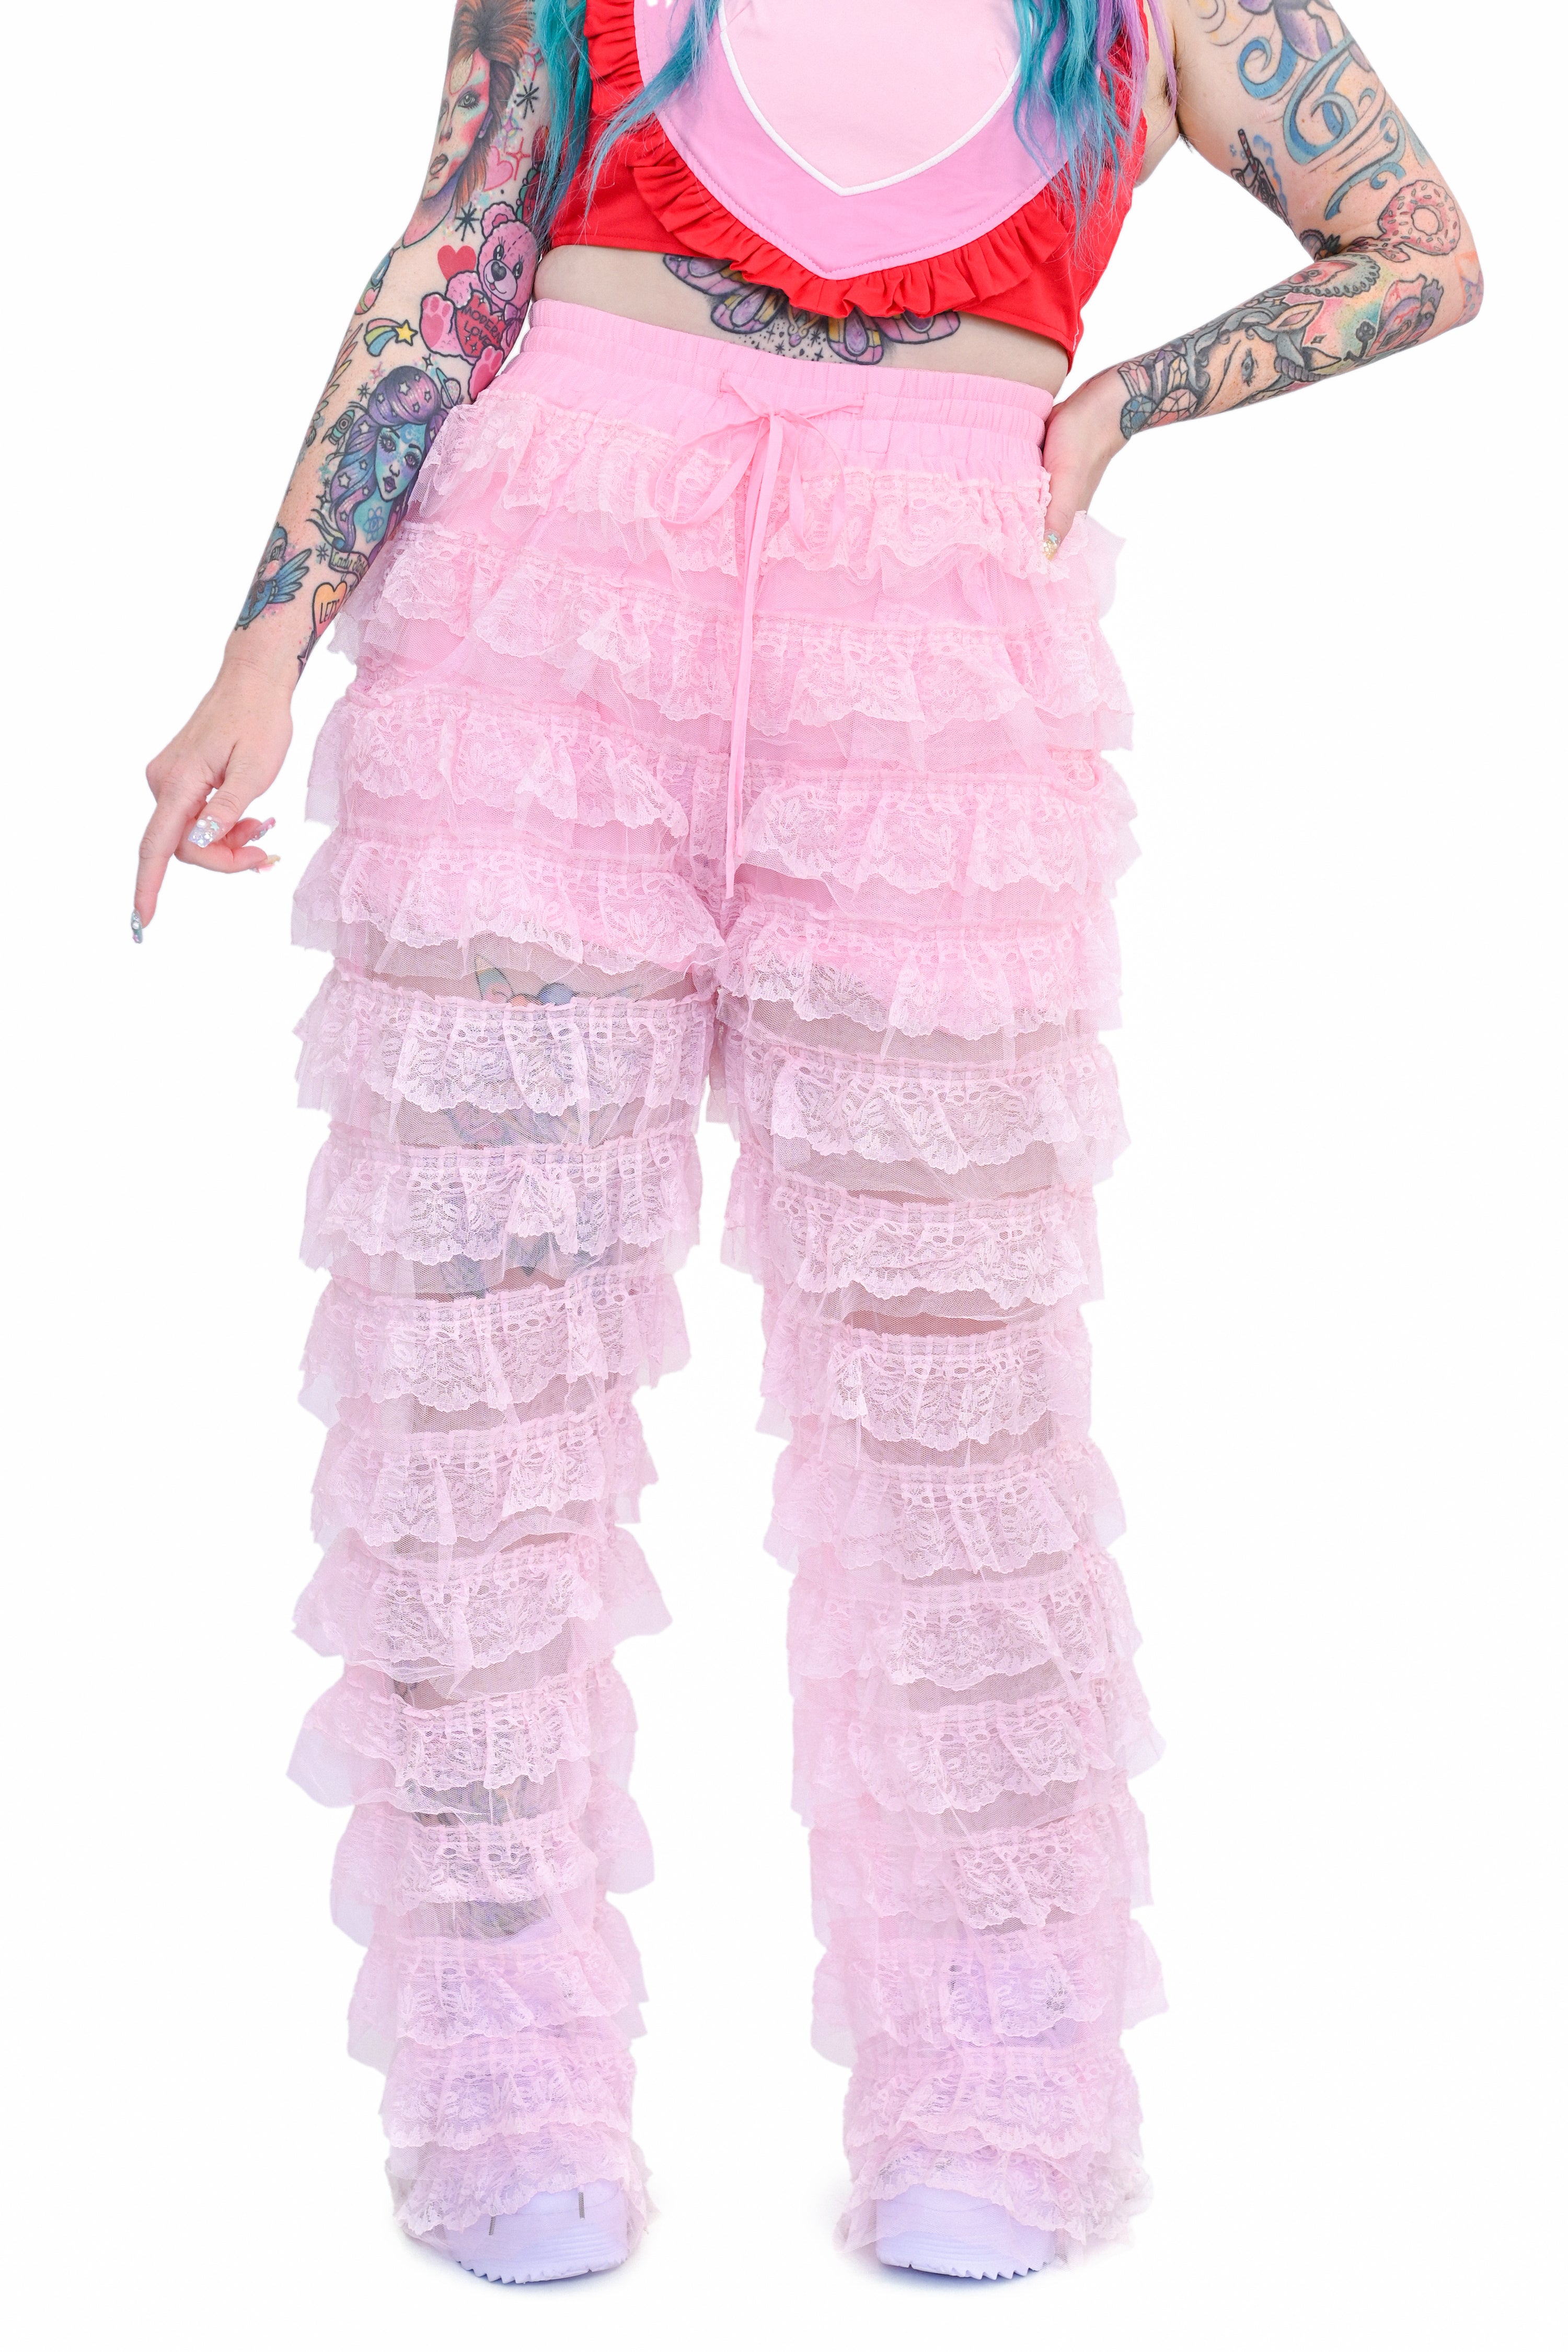 Angel Cake Ruffle Pants - Sign Up For Restock Notifications!